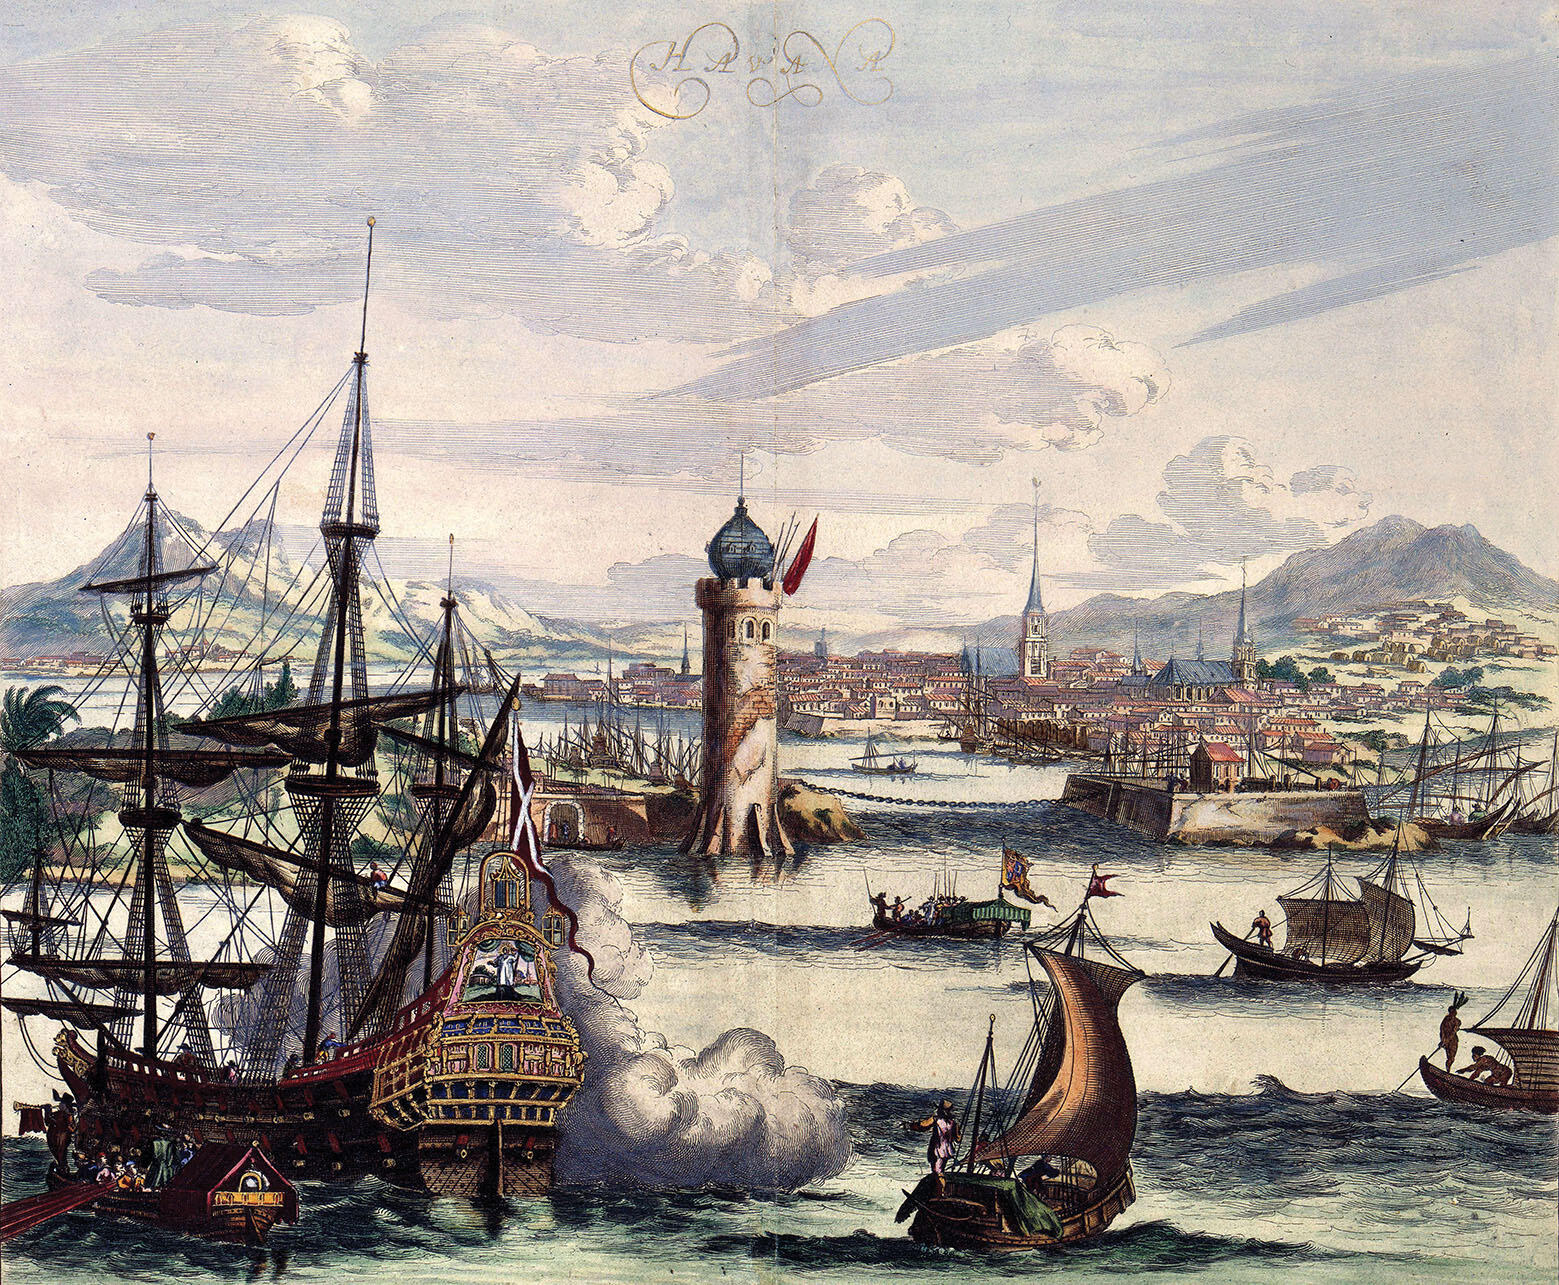 A fanciful rendition of Havana in a book engraving circa 1700. (Image from Wikipedia.)